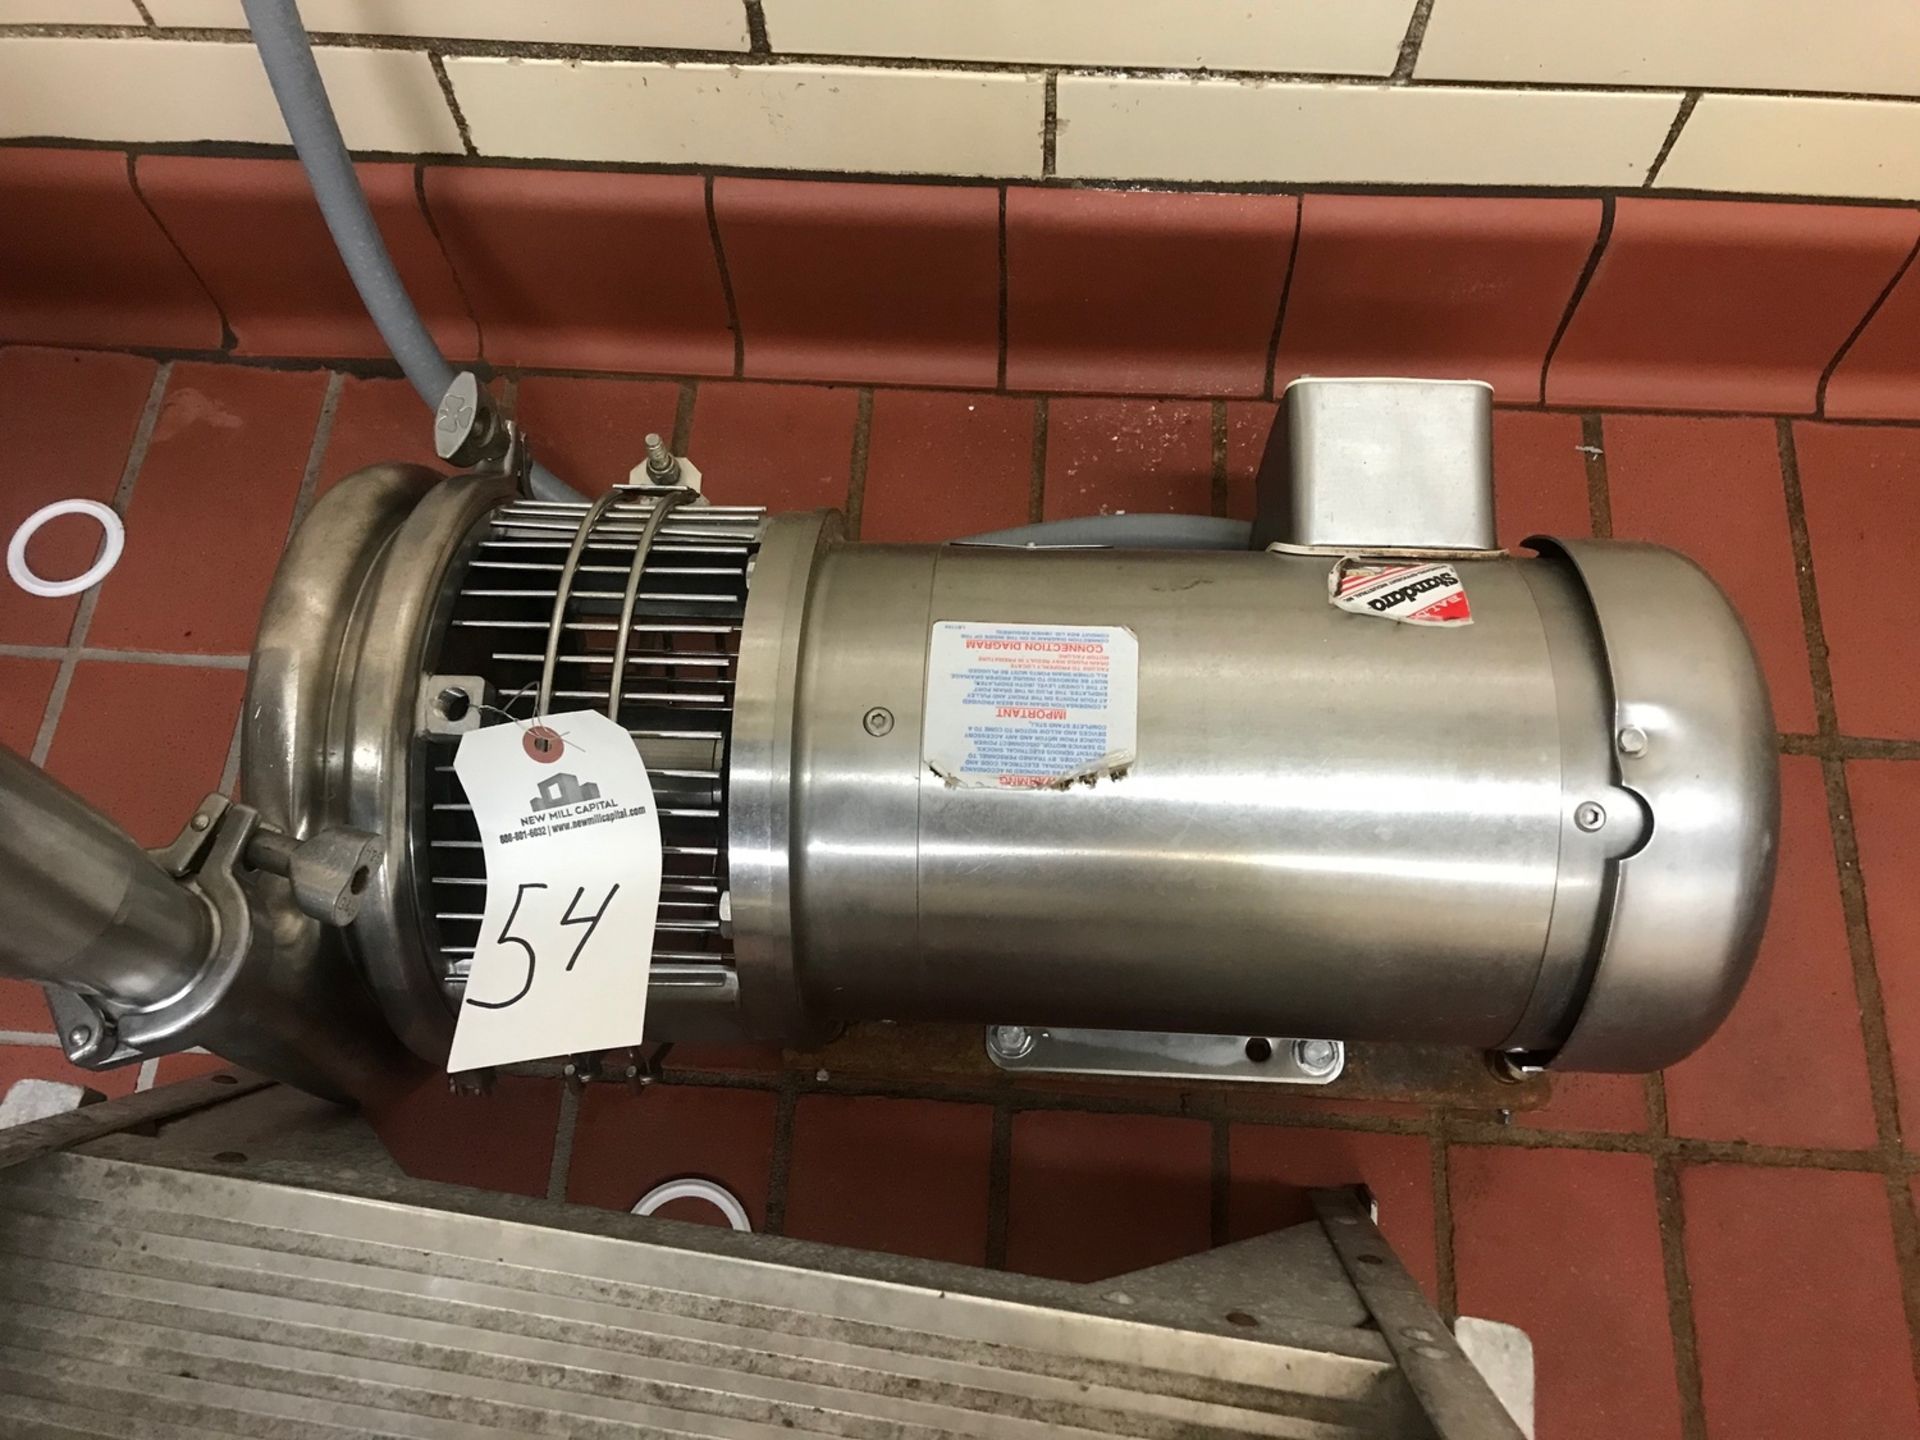 Stainless Steel Centrifugal Pump with Stainless Steel Motor, 3 HP, 2" inlet, 1.5" outlet